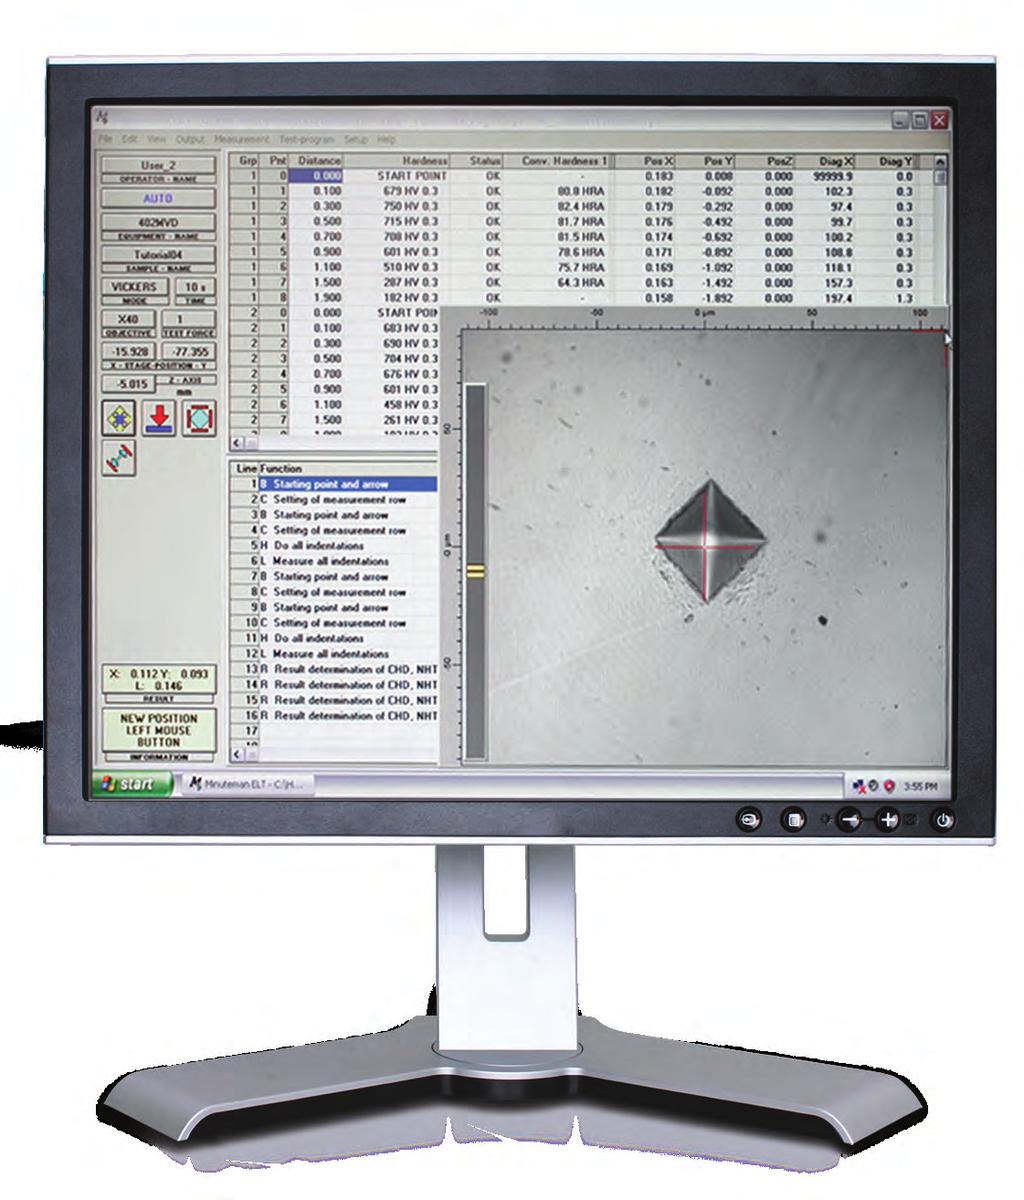 Automation Software for Hardness Testers Minuteman Automation Software The Wilson Hardness Minuteman Software automates the stage navigation and measurement process of your hardness testing systems.